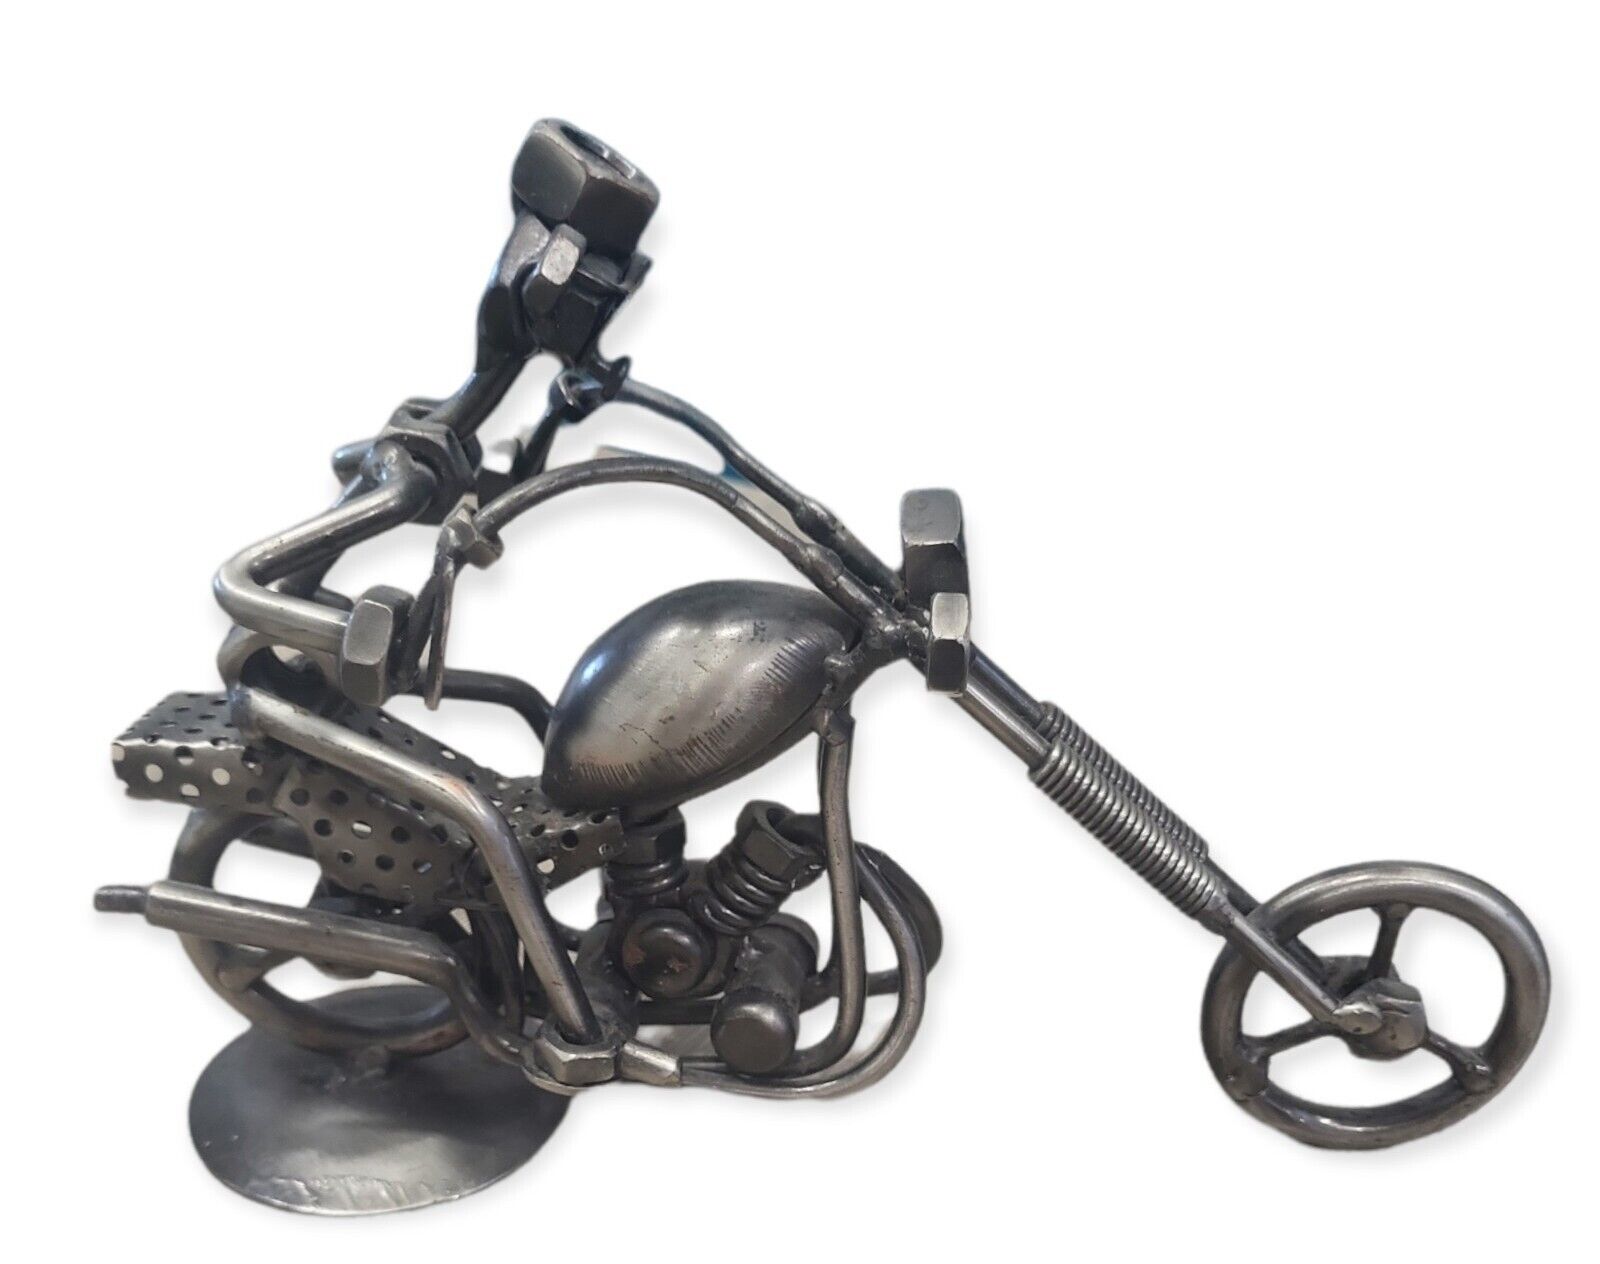 Vintage Metal Art Handmade Nuts and Bolts Racing Motorcycle Chopper w/ Rider 